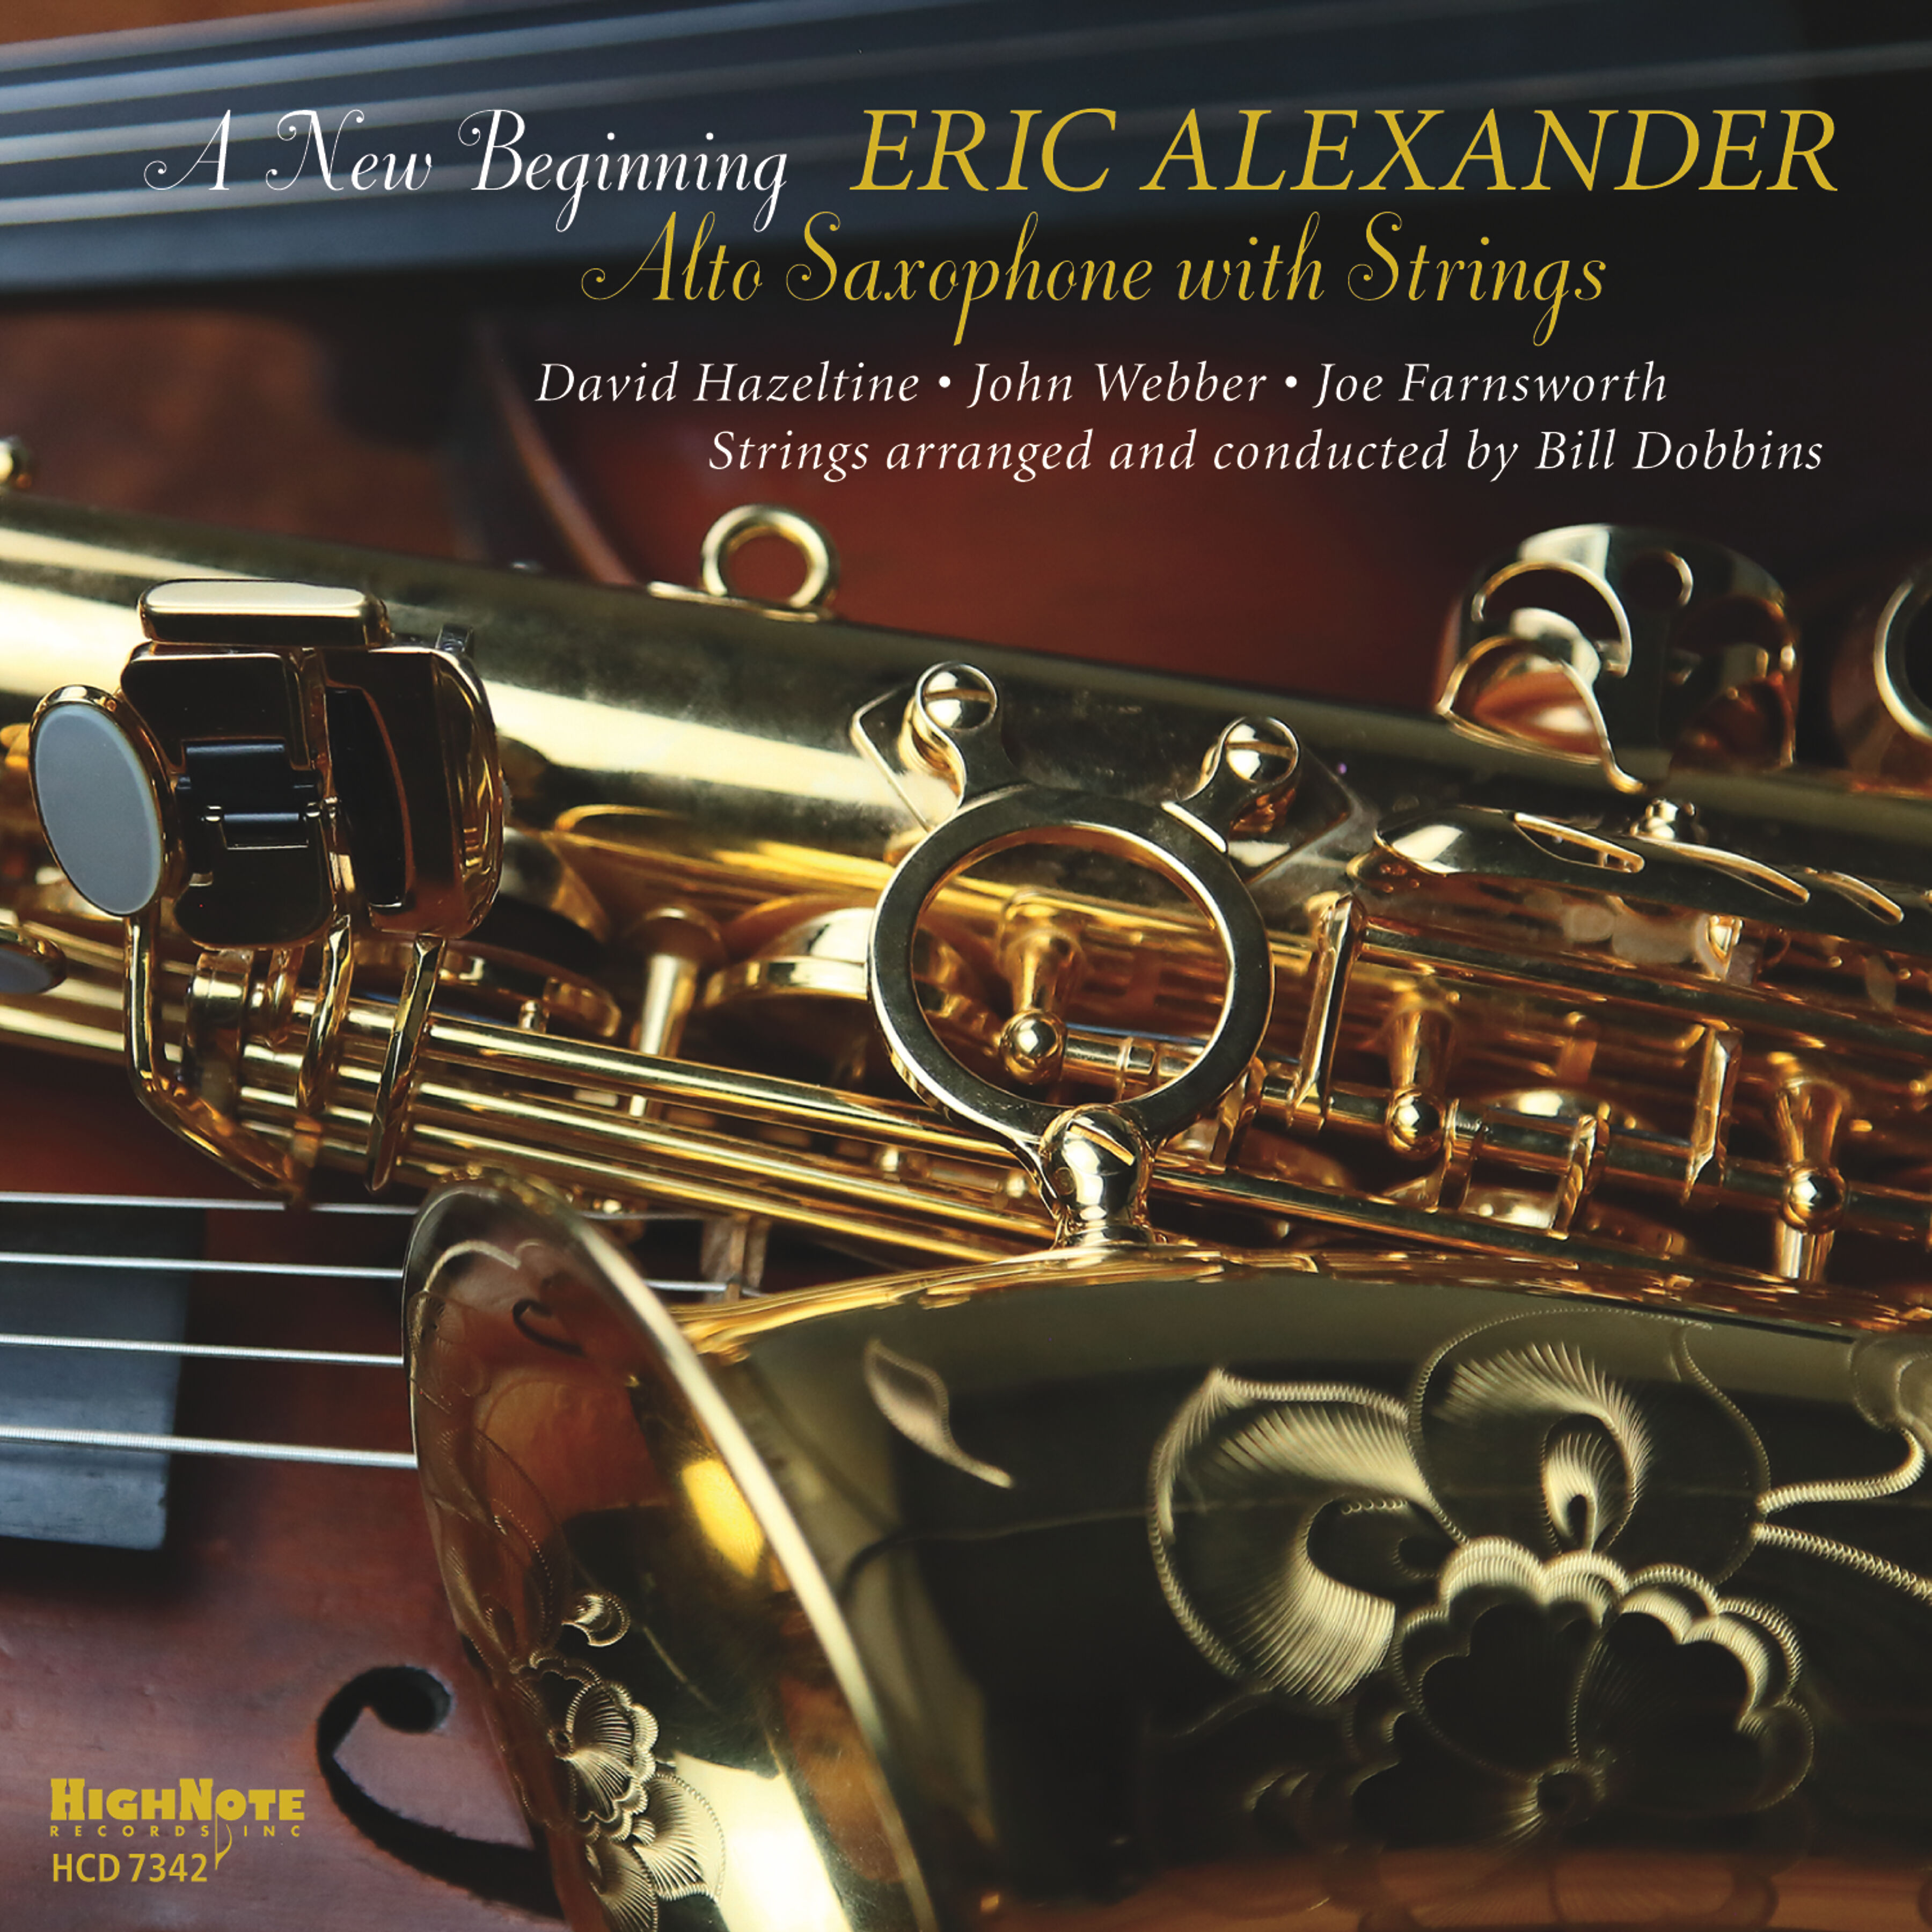 Eric Alexander - A New Beginning (alto Saxophone with Strings)